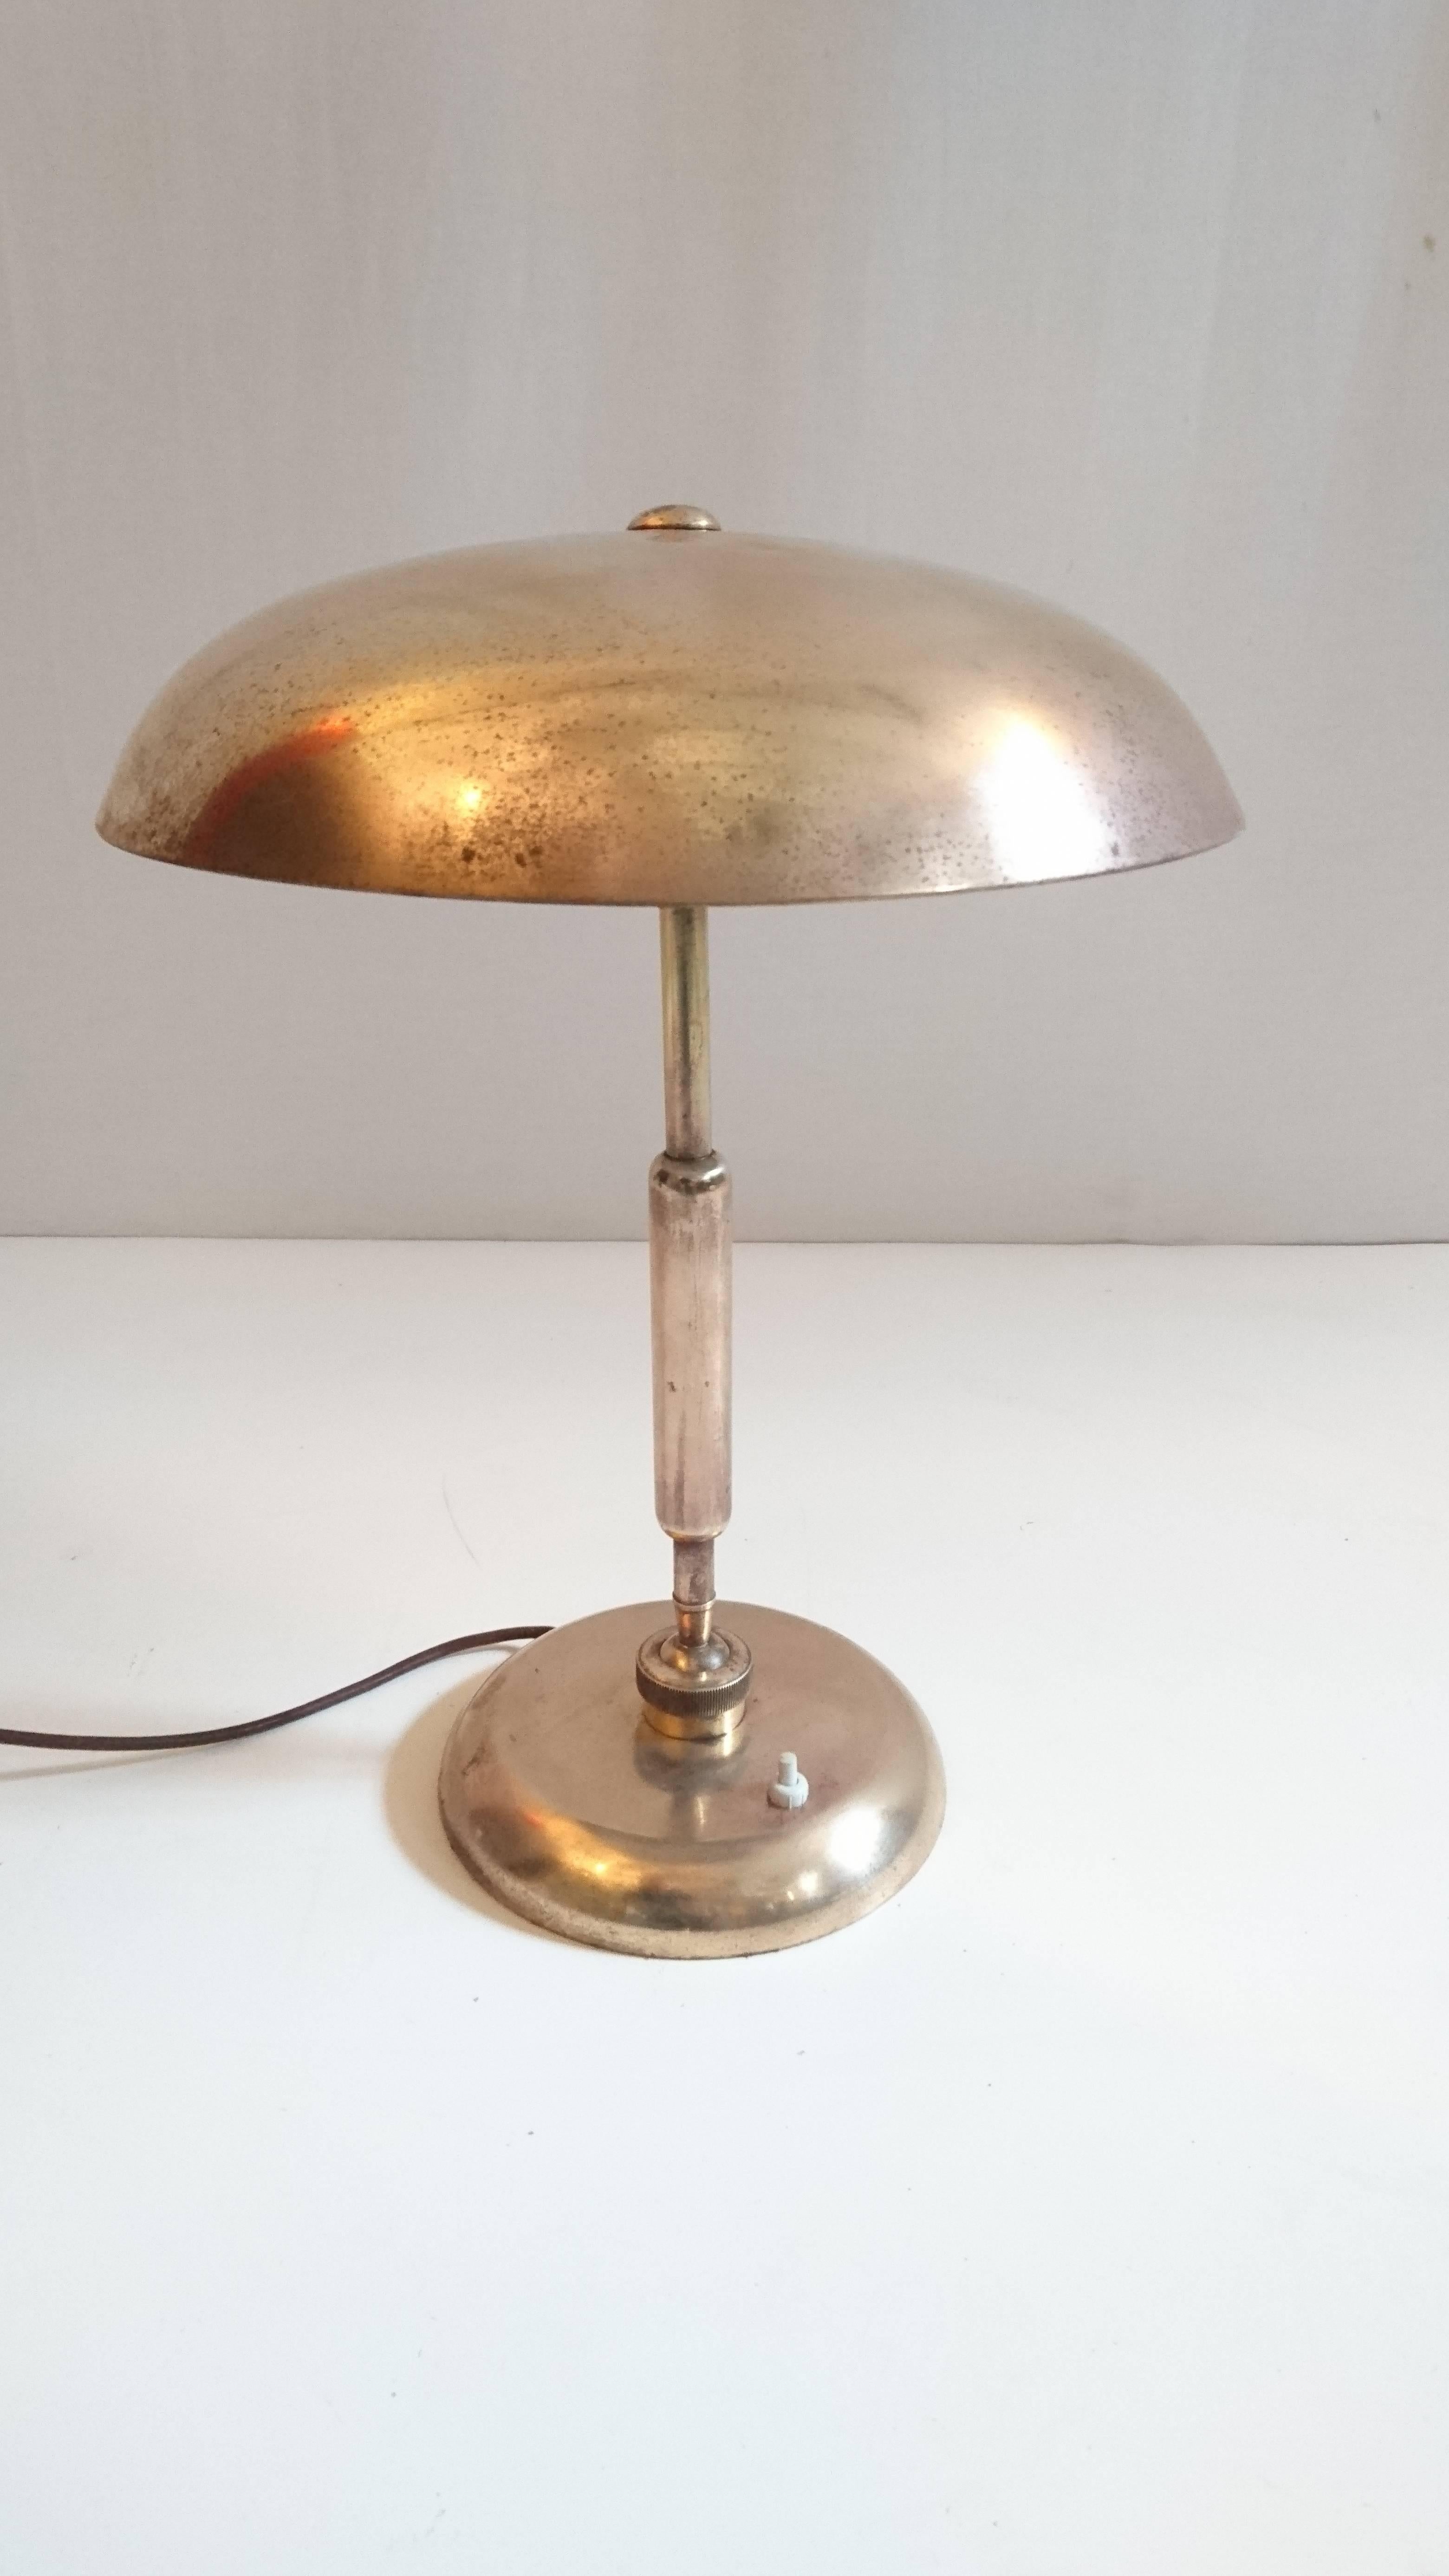 Desk made in Italy in brass with two adjustable points to adjust the position of the lamp. Has a heavy base to support the angle of the lamp.